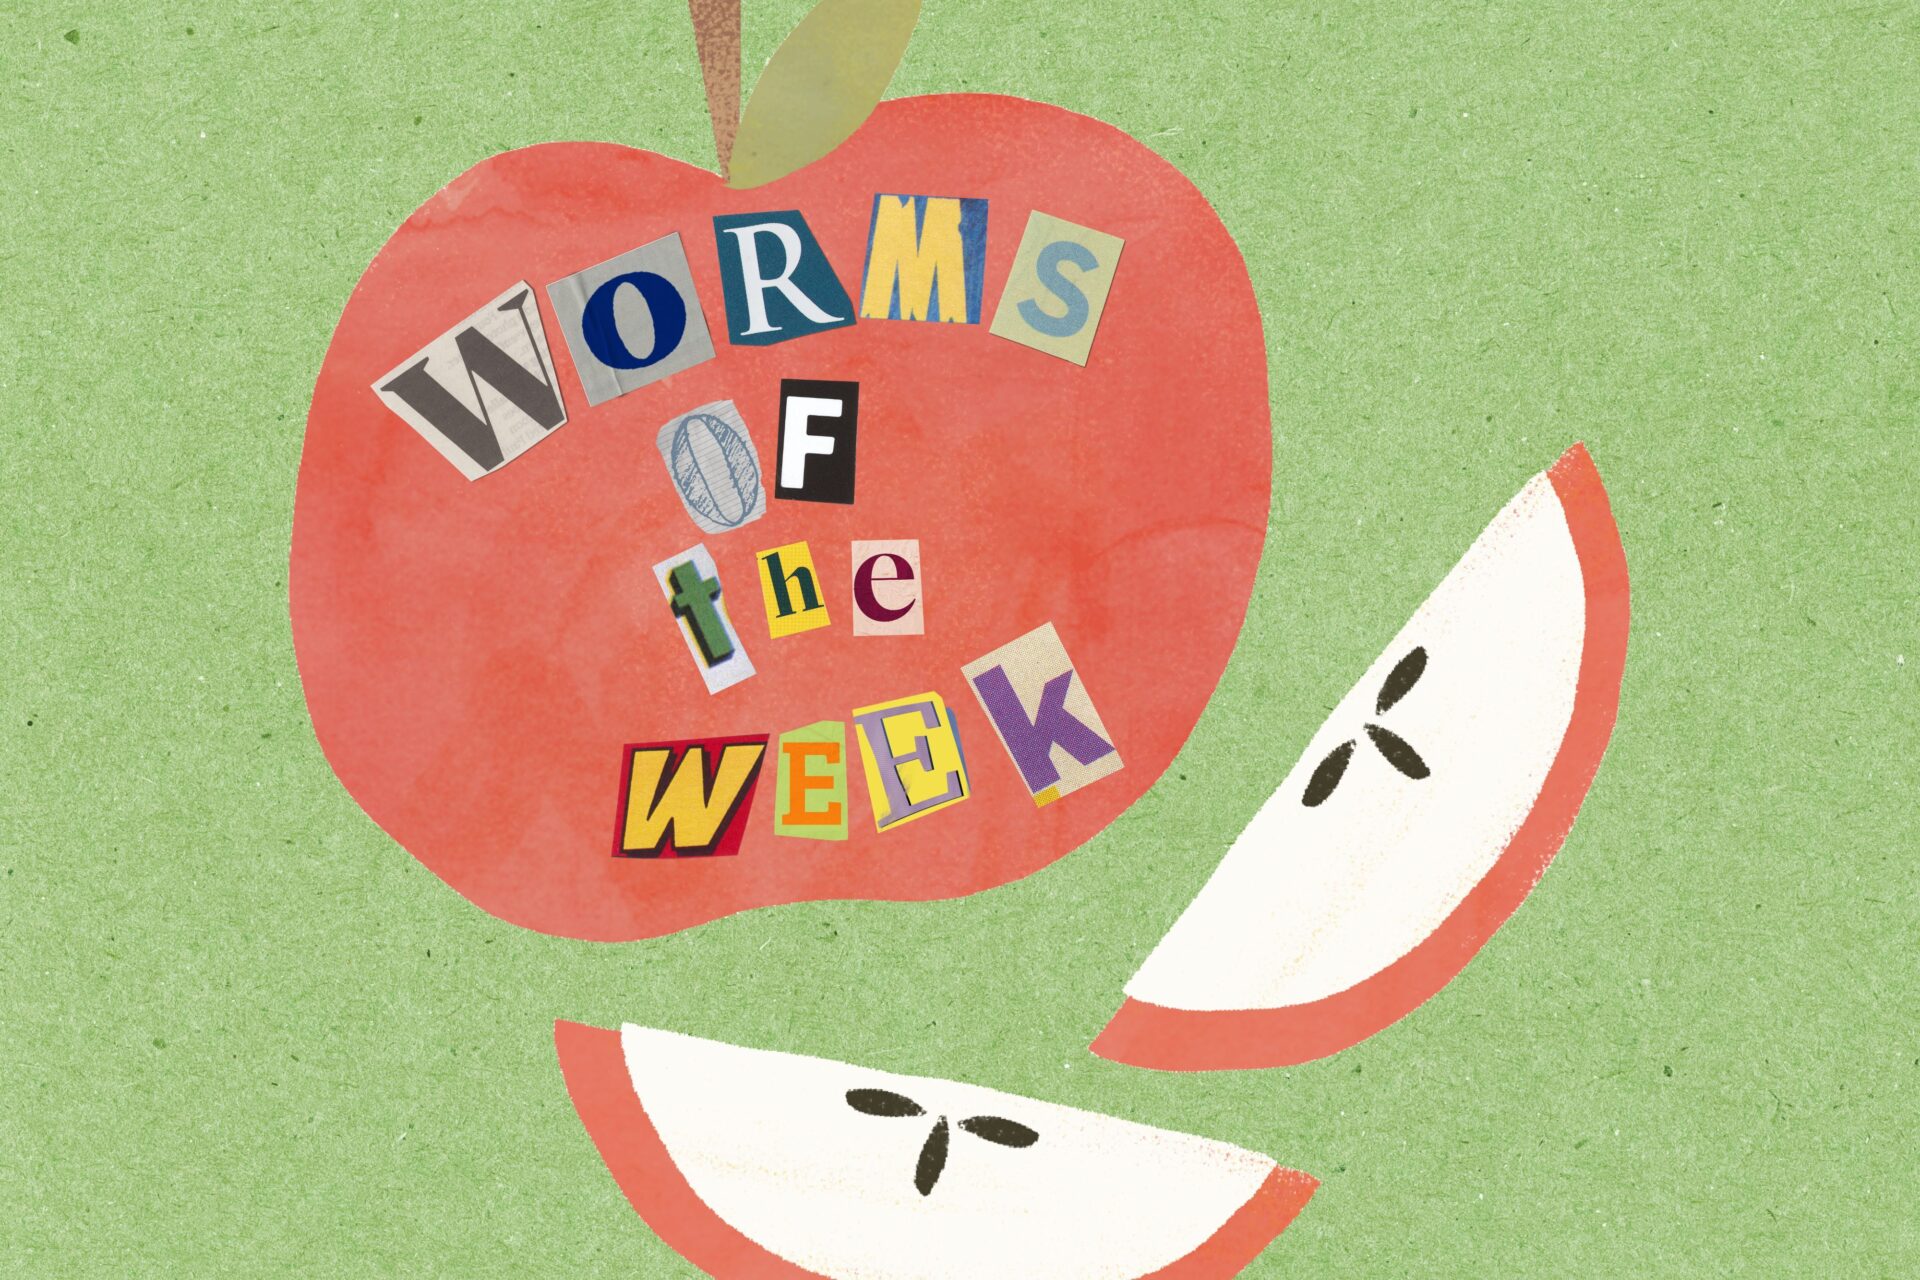 Worms of the Week logo